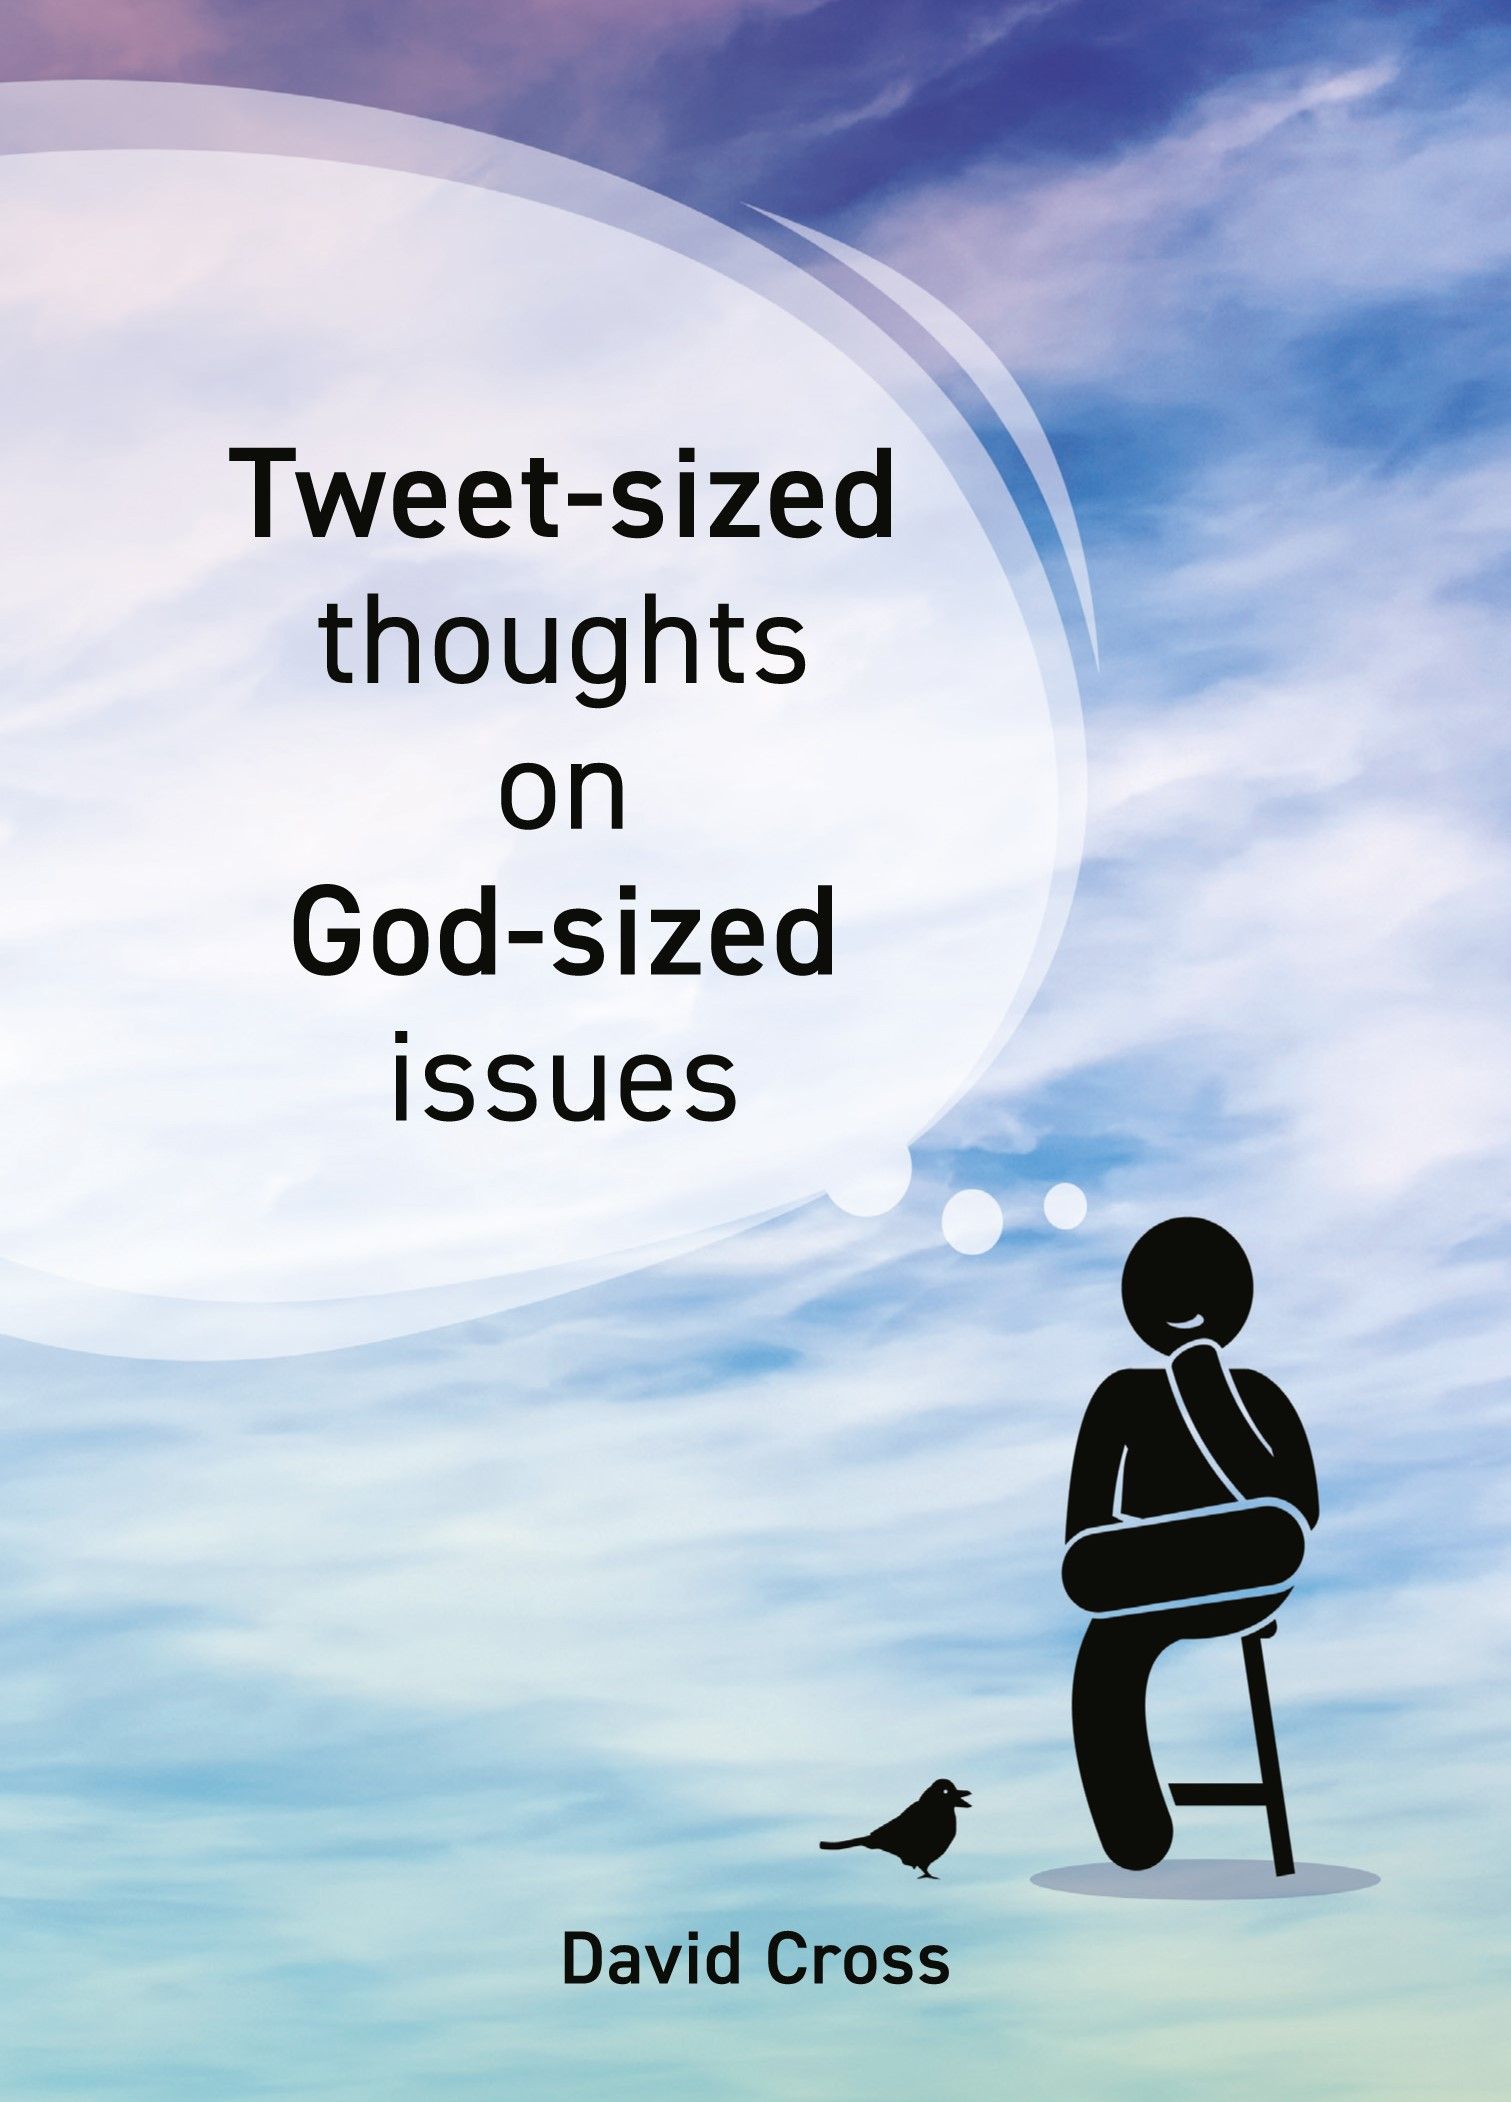 Tweet-sized thoughts on God-sized issues